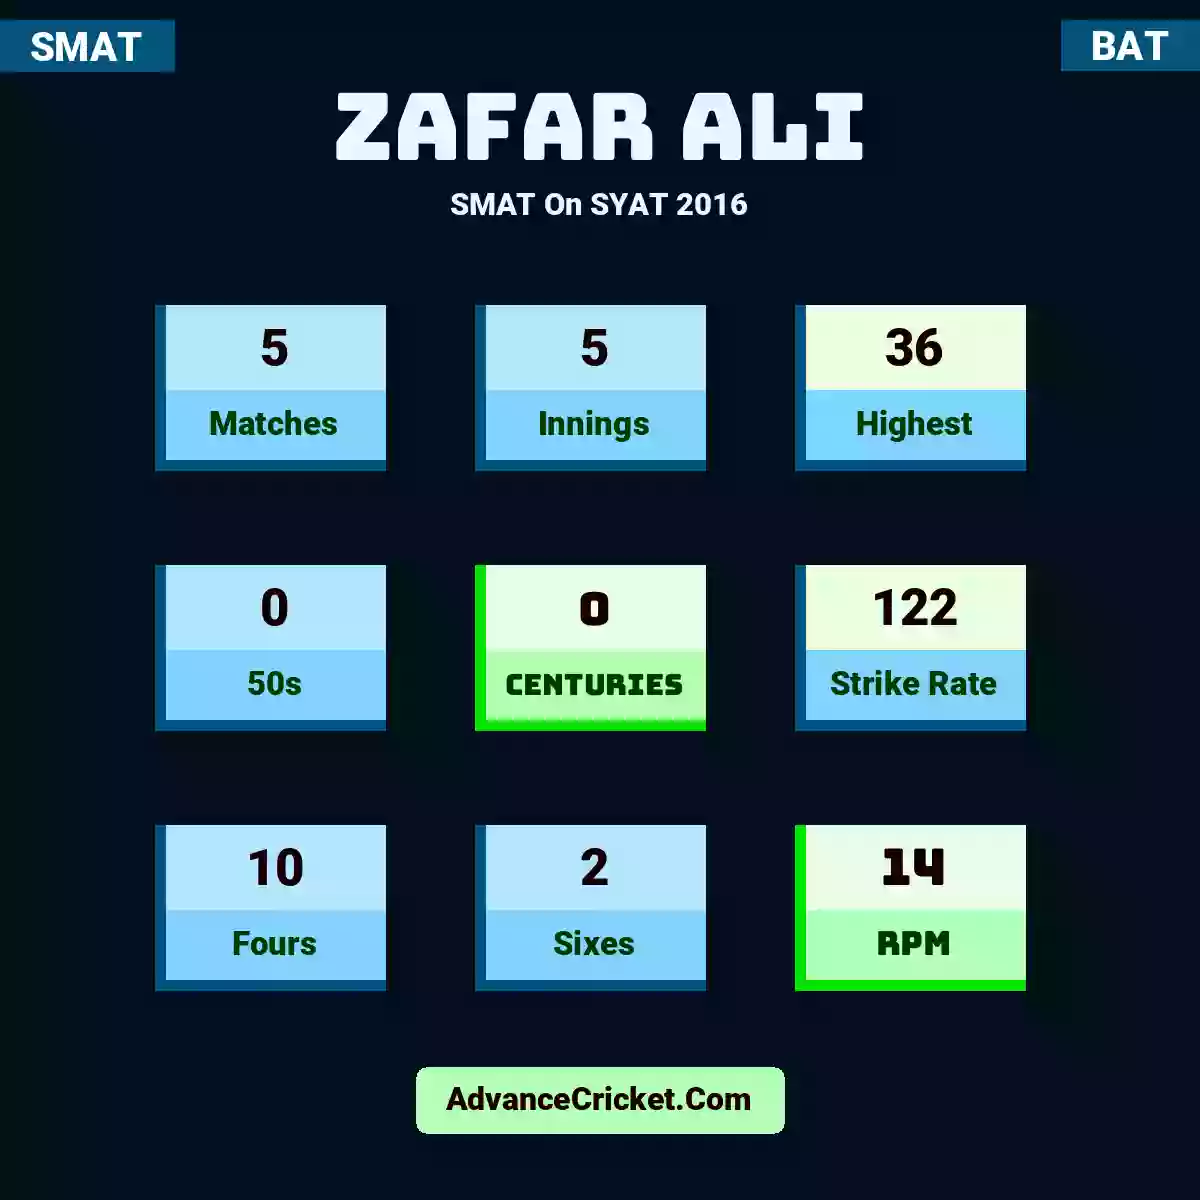 Zafar Ali SMAT  On SYAT 2016, Zafar Ali played 5 matches, scored 36 runs as highest, 0 half-centuries, and 0 centuries, with a strike rate of 122. Z.Ali hit 10 fours and 2 sixes, with an RPM of 14.